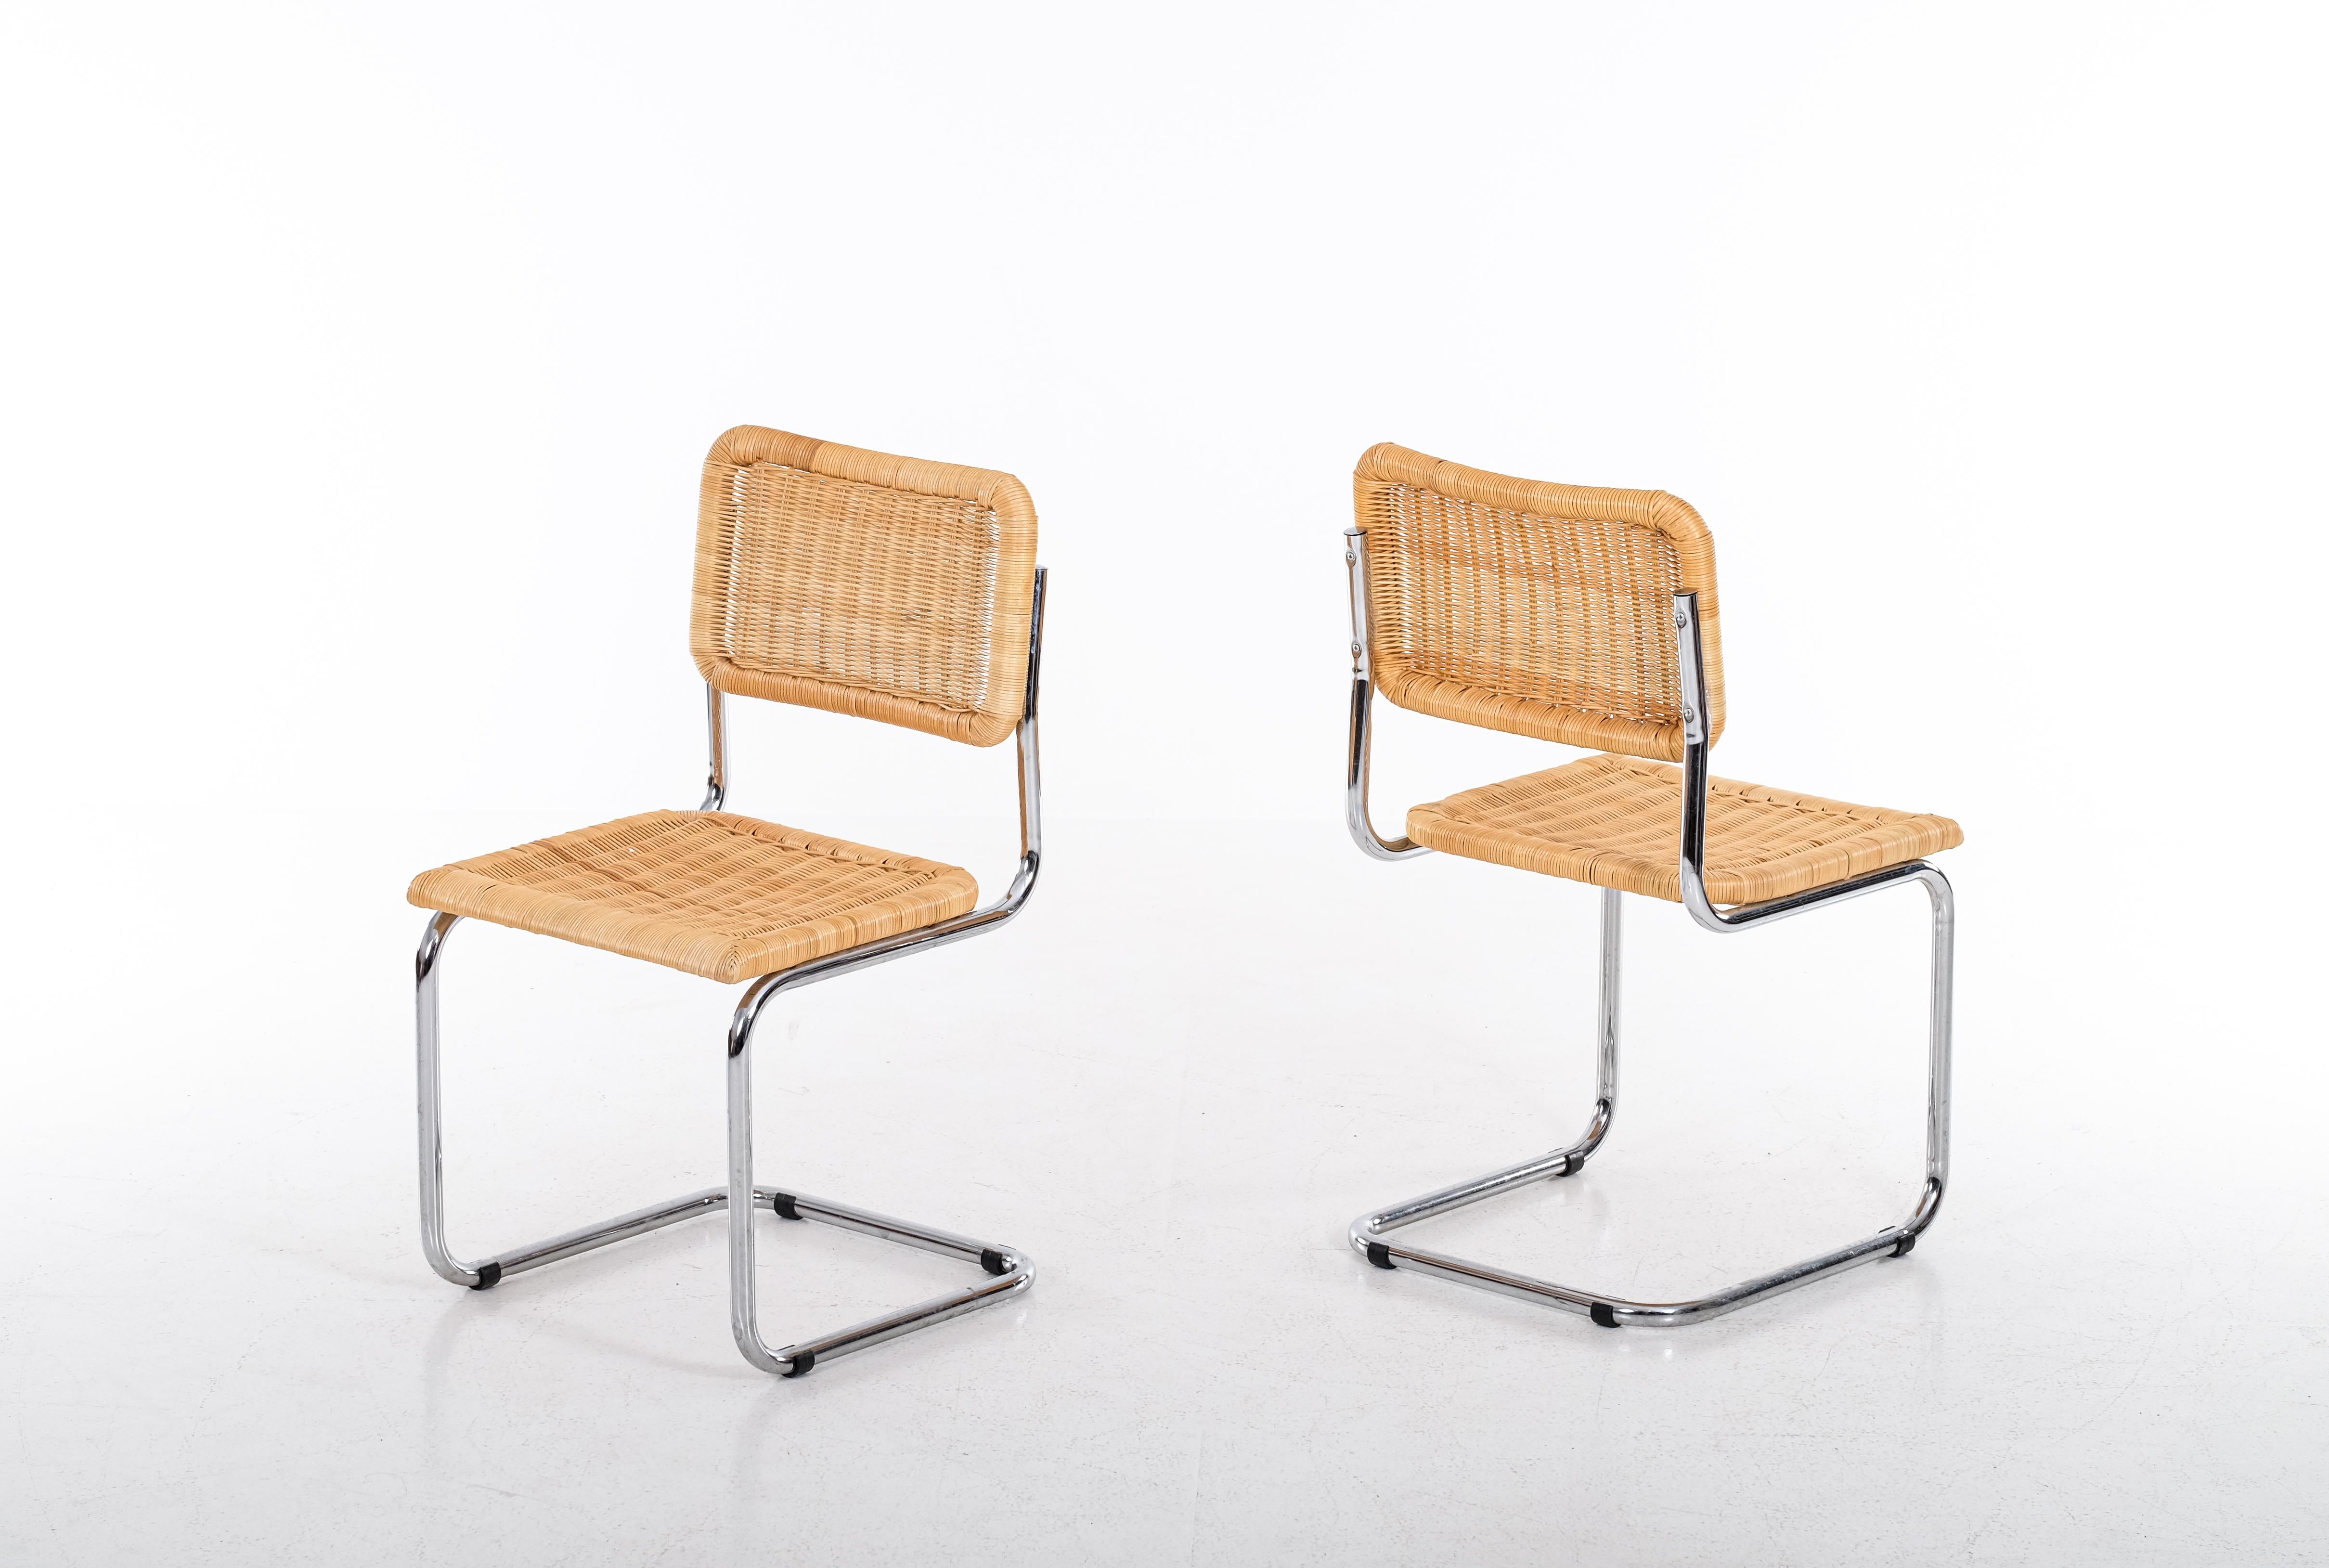 Pair of 'Cesca' chairs designed by Marcel Breuer, produced during the 1980s.
Rare version with rattan. 
Good vintage condition. 
Please note: set of 3 available, listed price is for a single chair. 